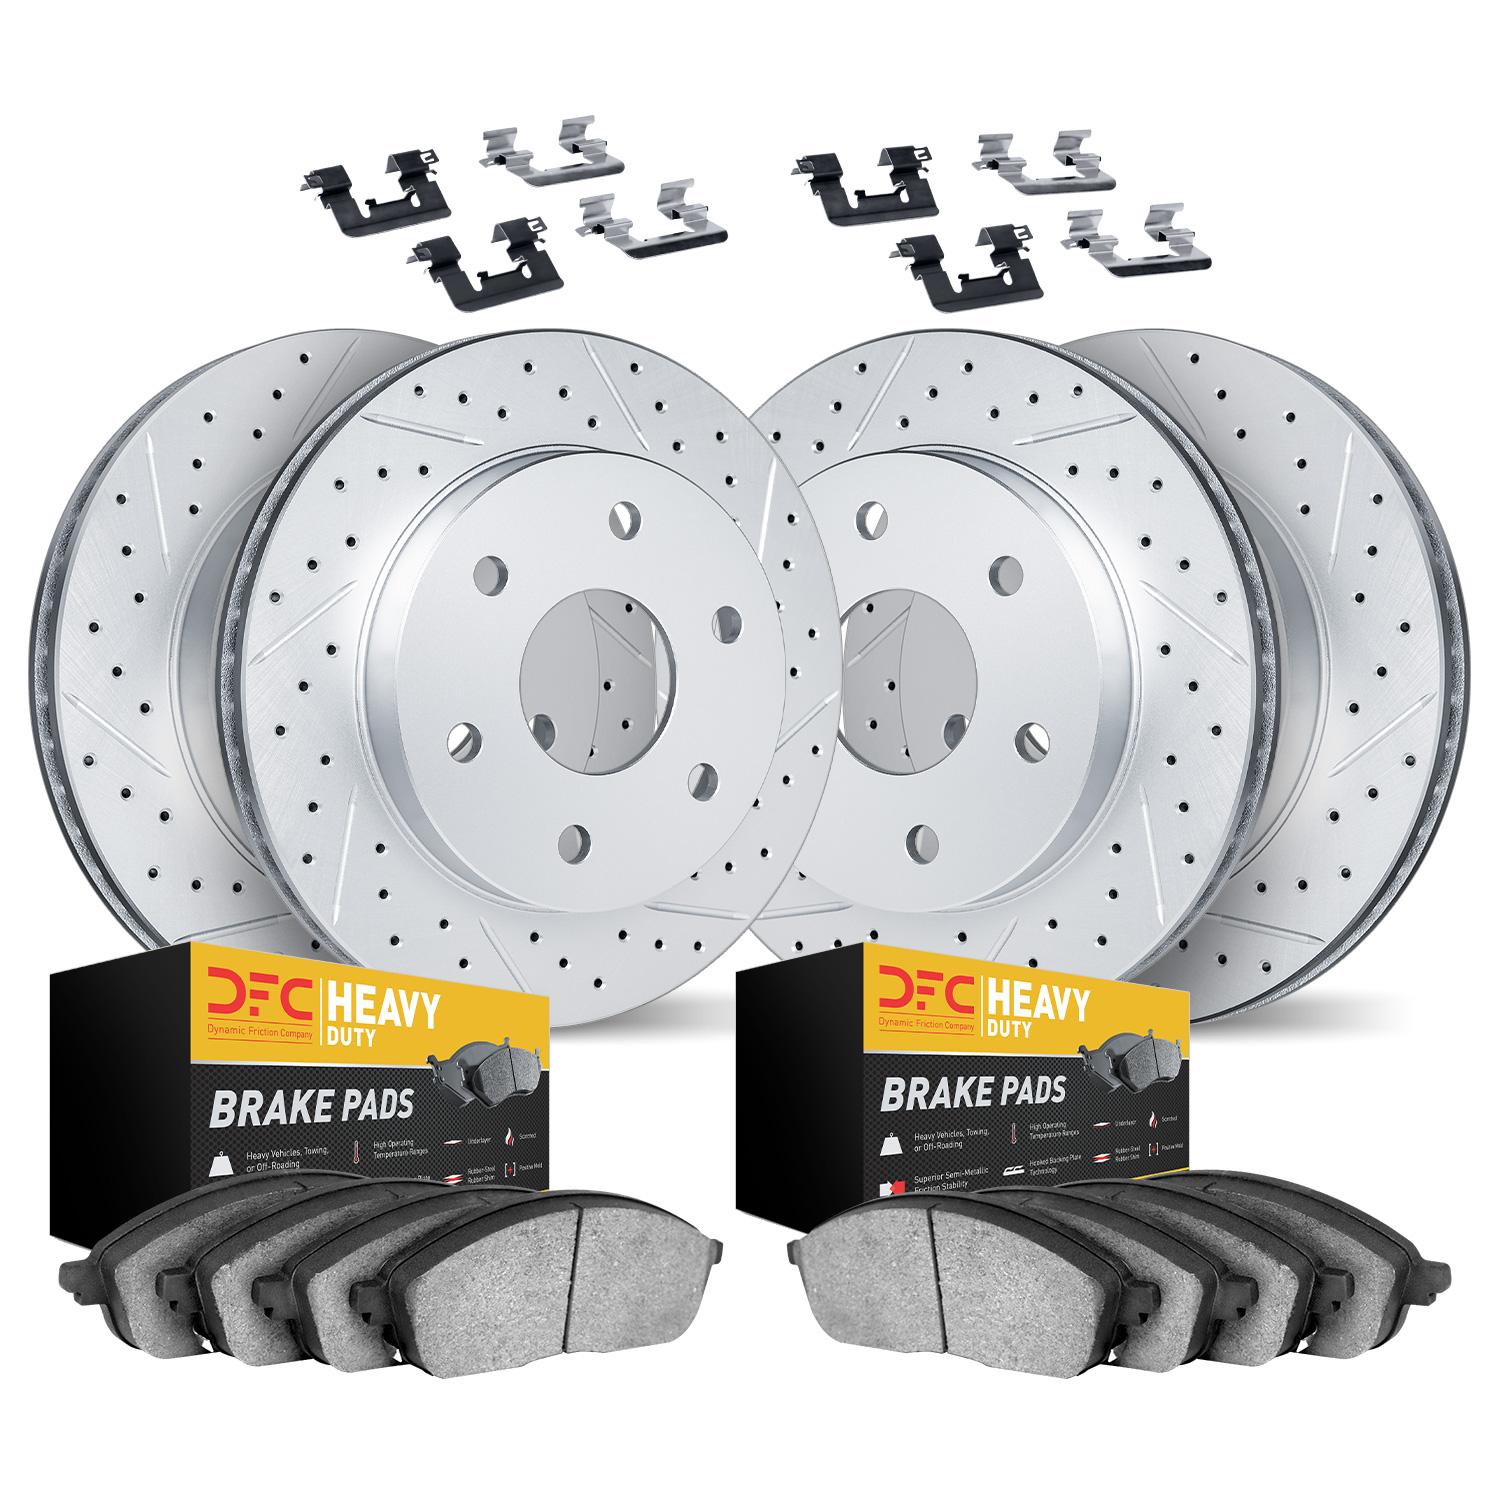 2214-99070 Geoperformance Drilled/Slotted Rotors w/Heavy-Duty Pads Kit & Hardware, 2010-2011 Ford/Lincoln/Mercury/Mazda, Positio